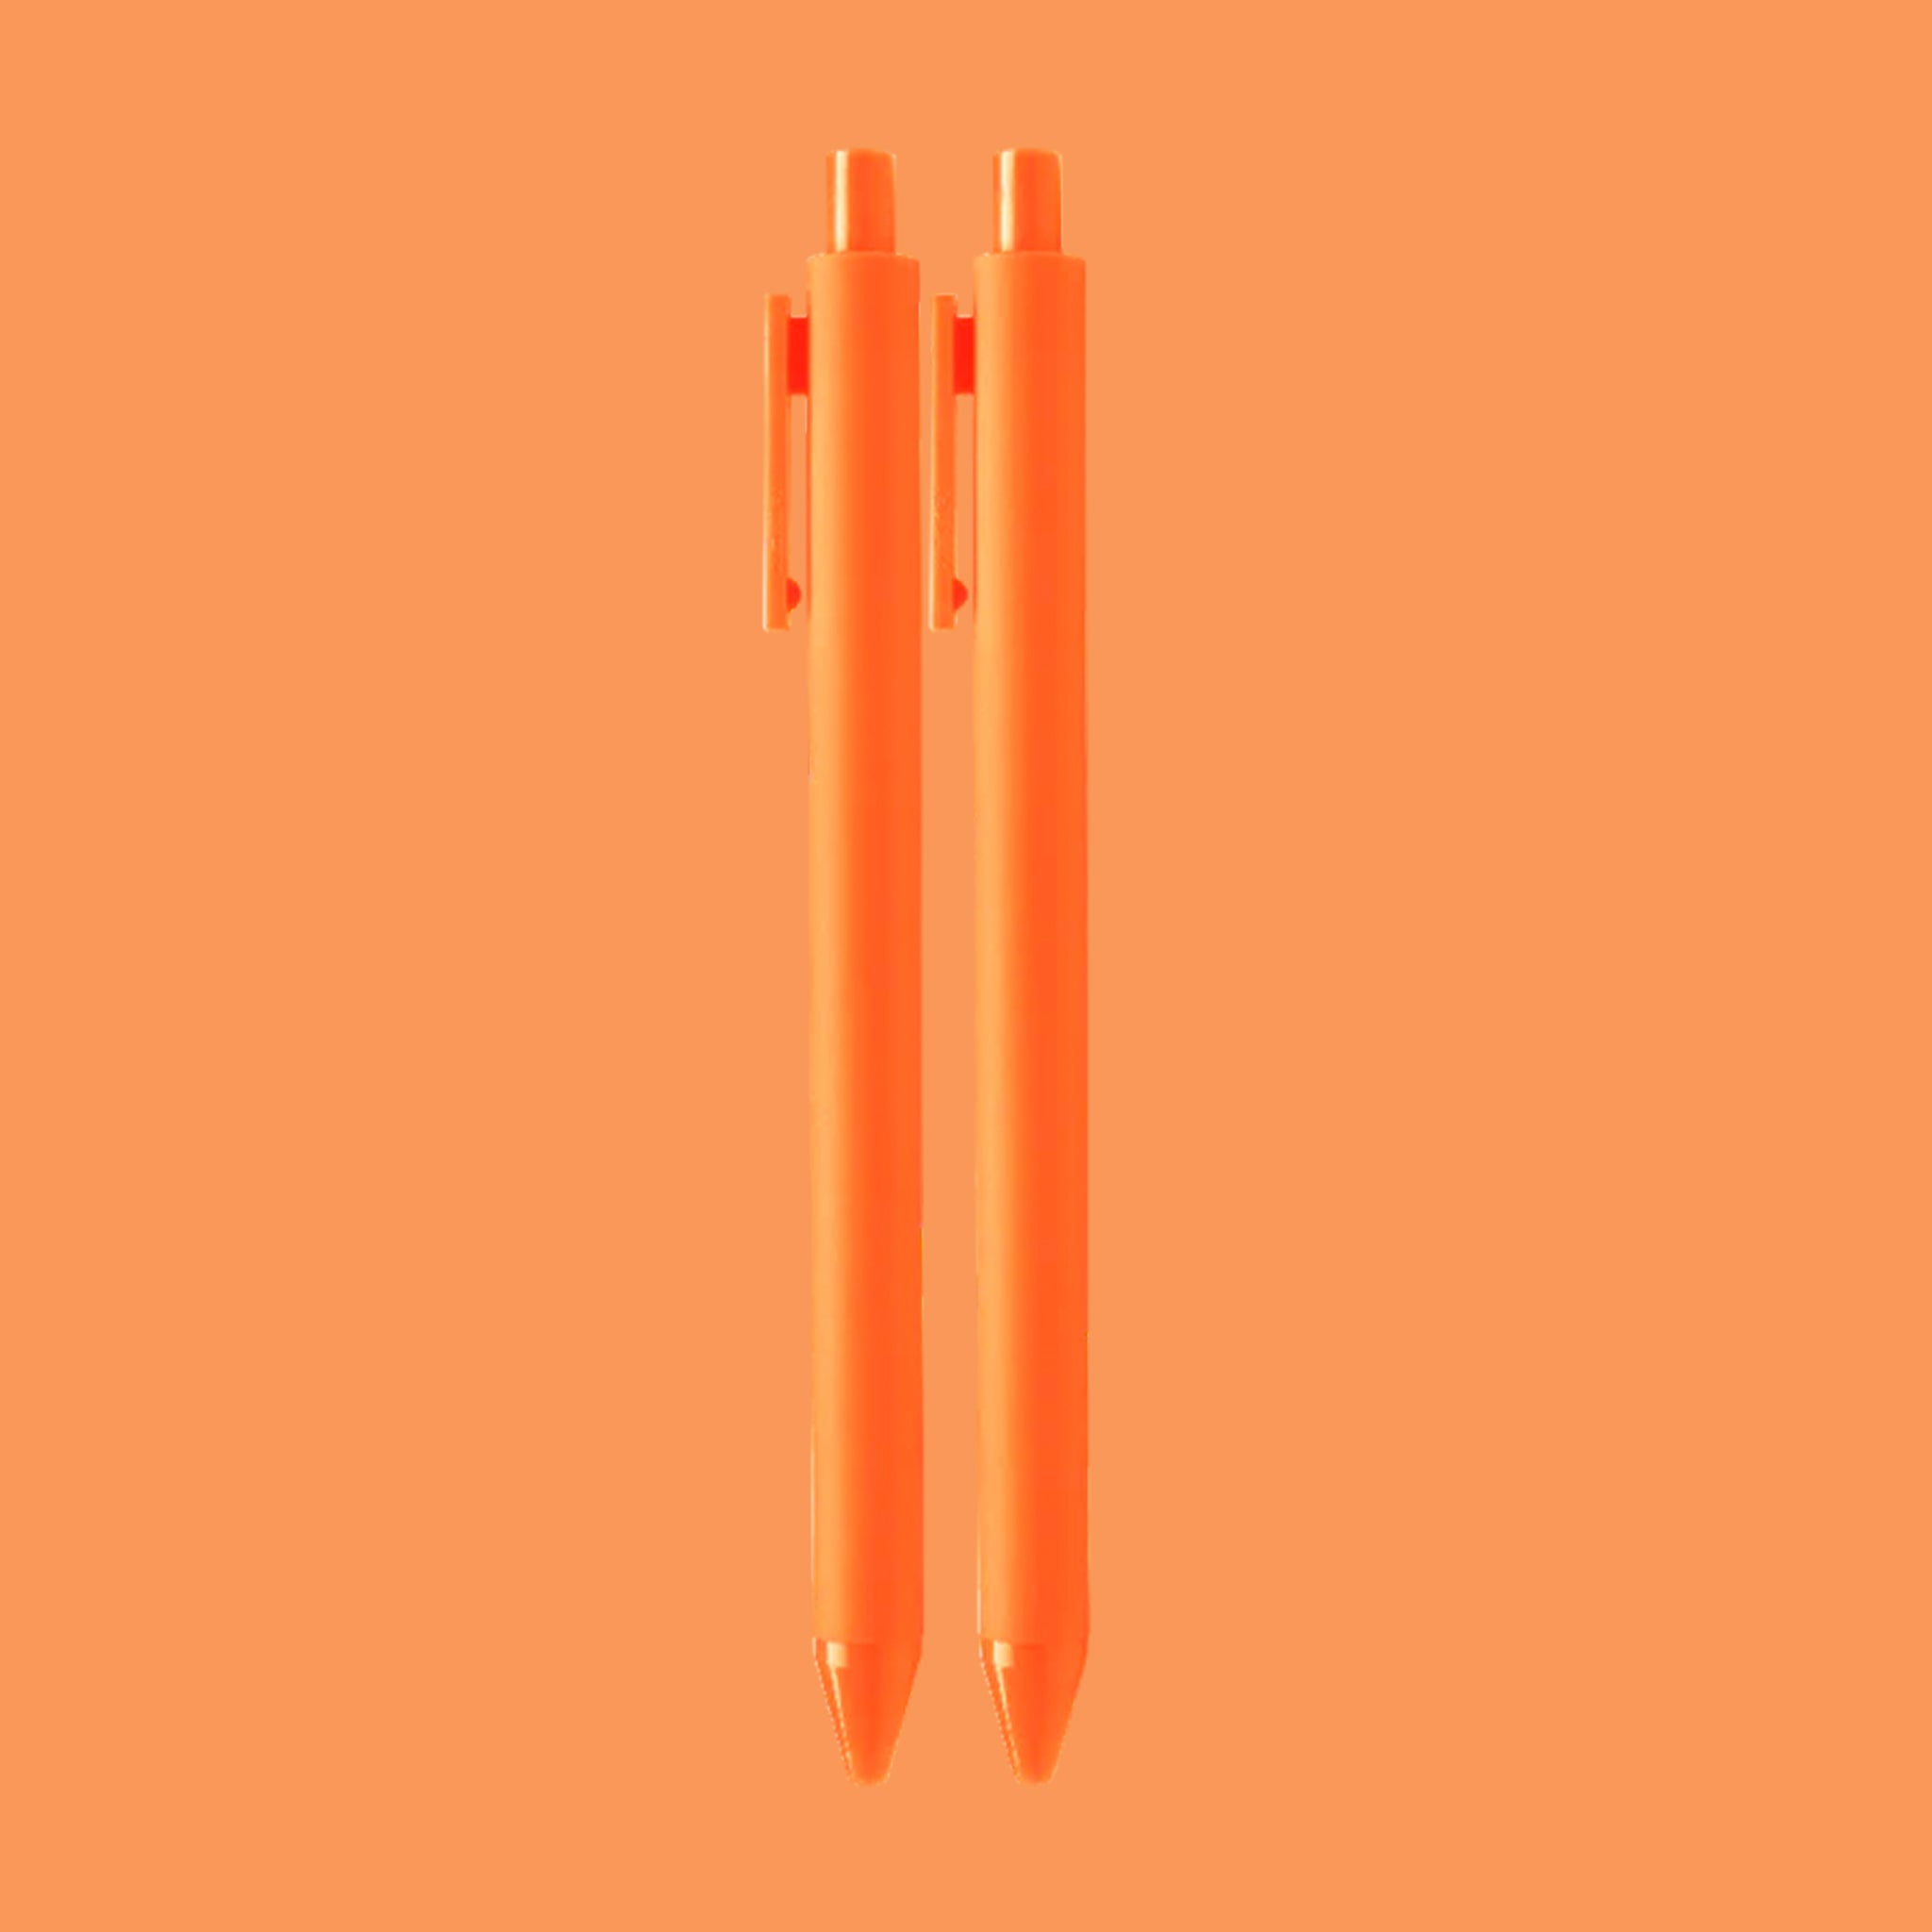 On an orange background is a pair of orange pens. 